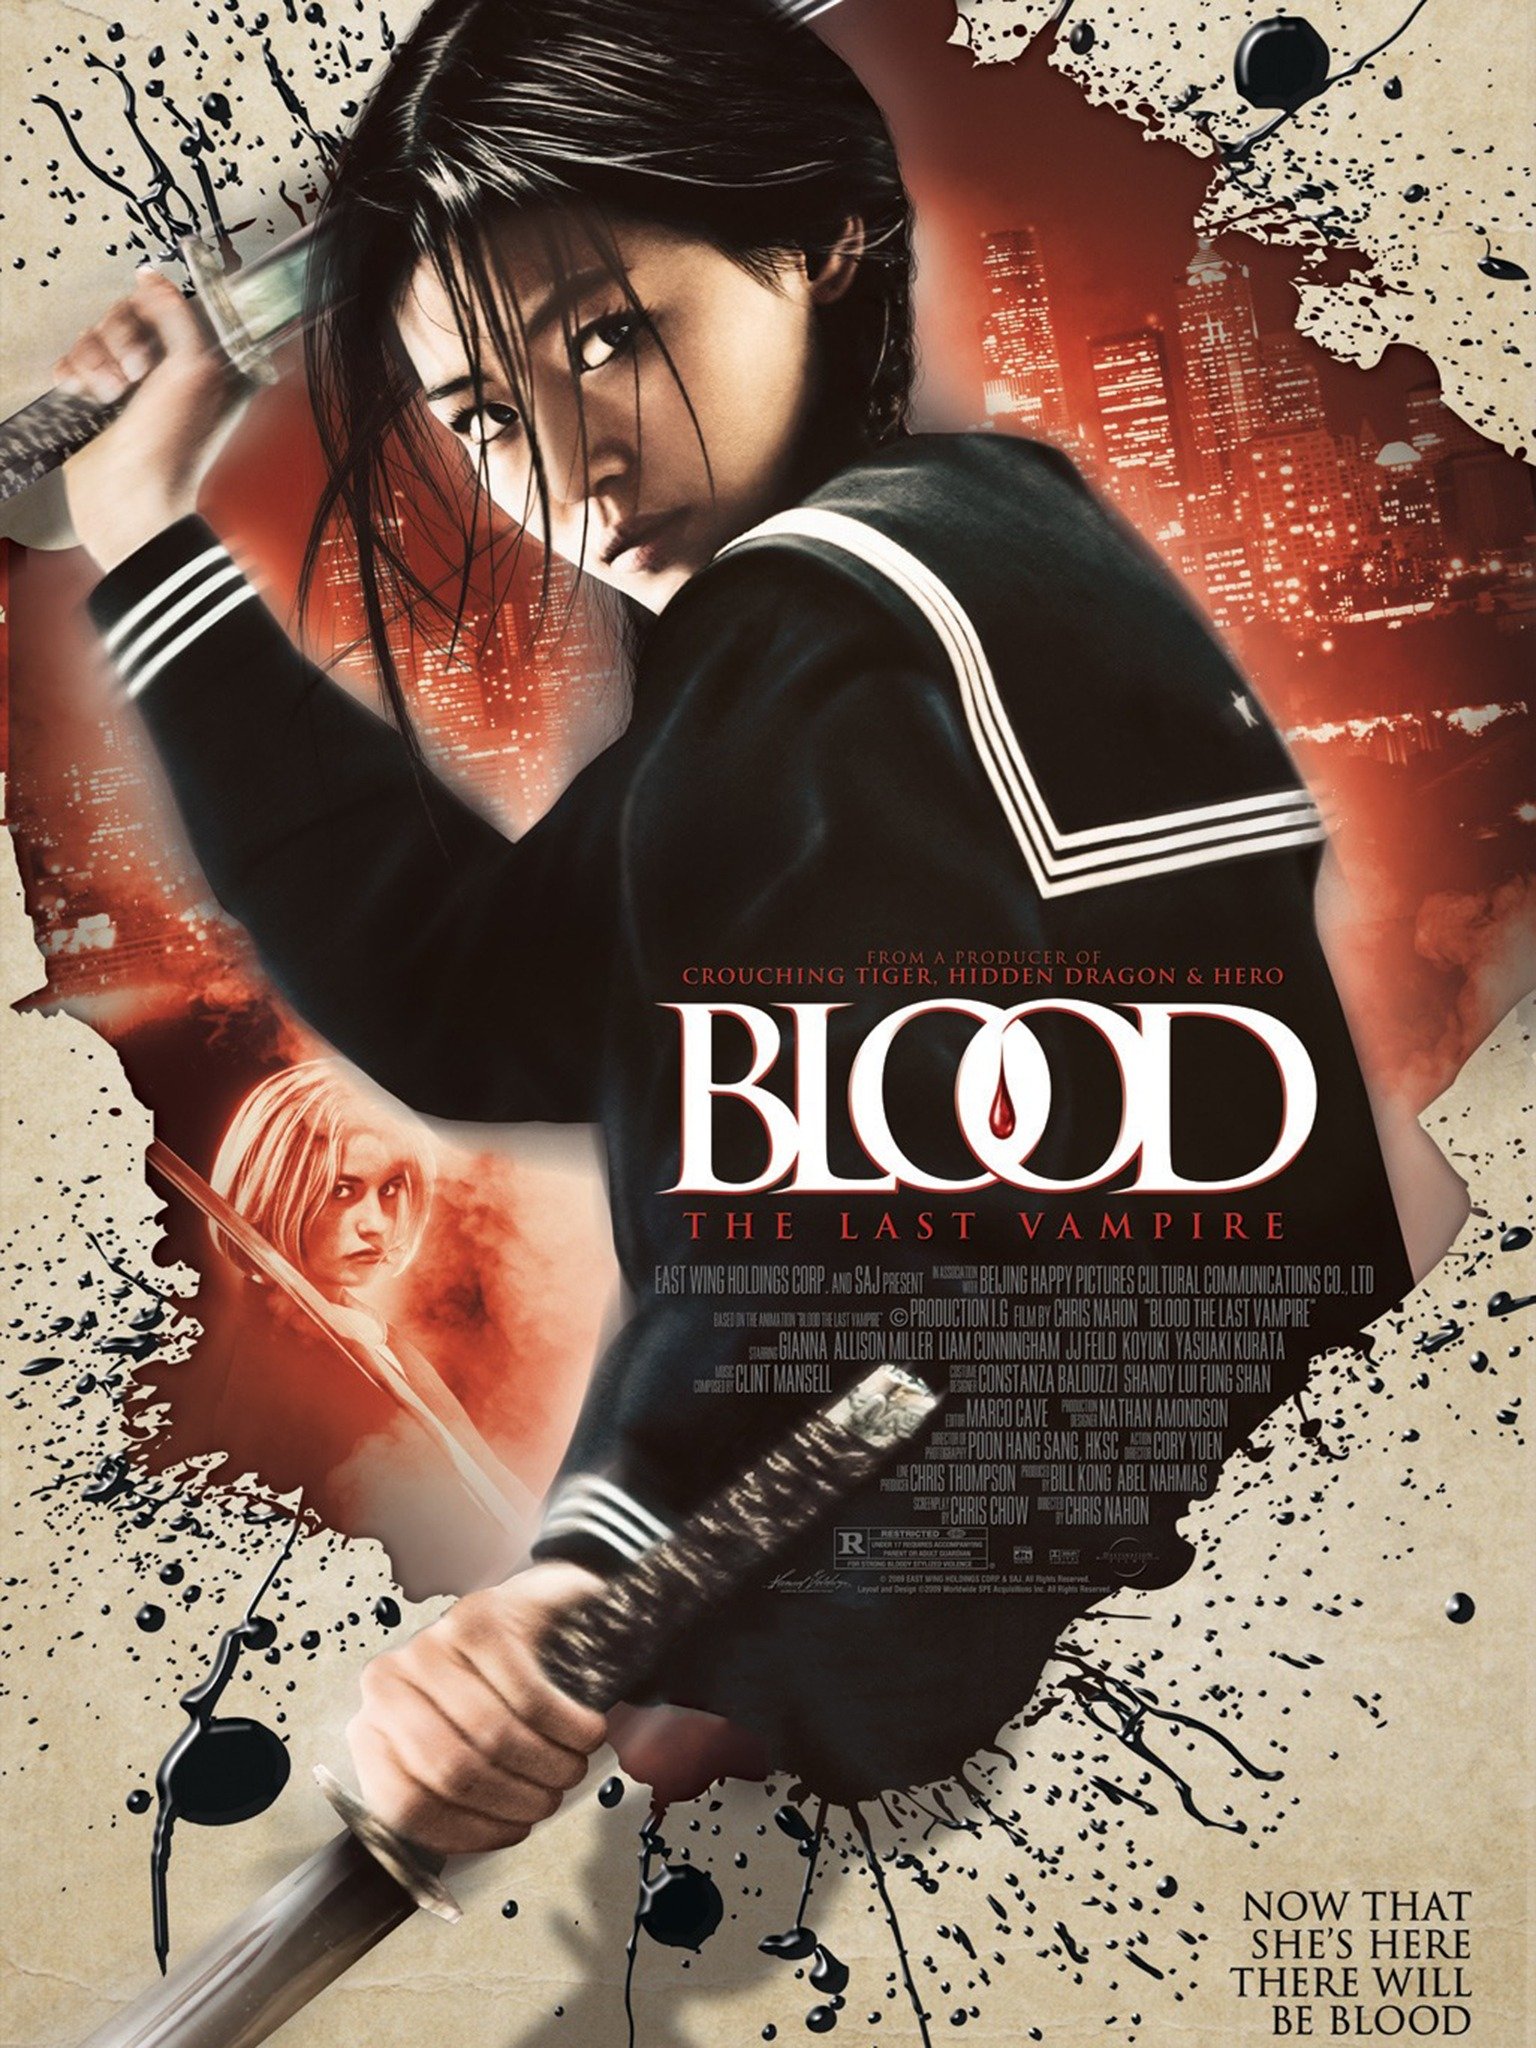 BLOOD The Last Vampire film review